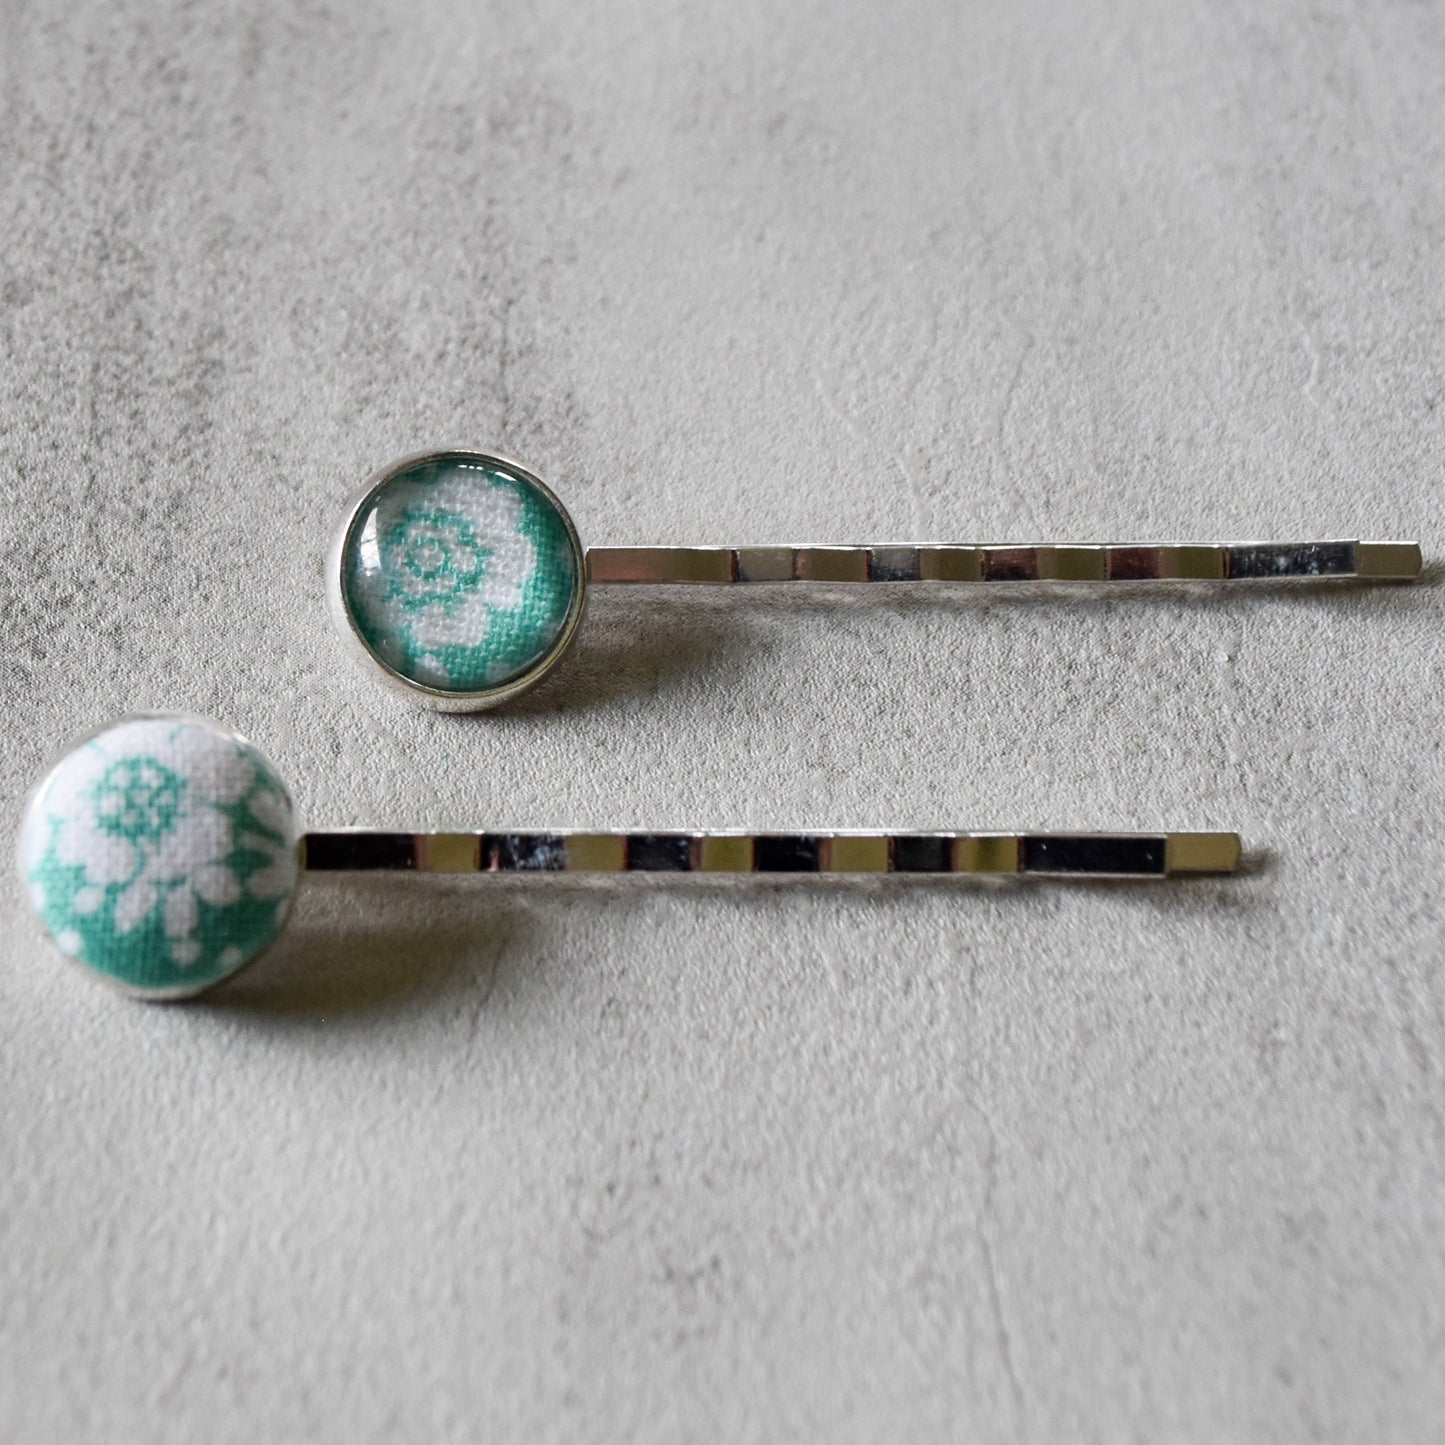 Turquoise Flowers Bobby Pins